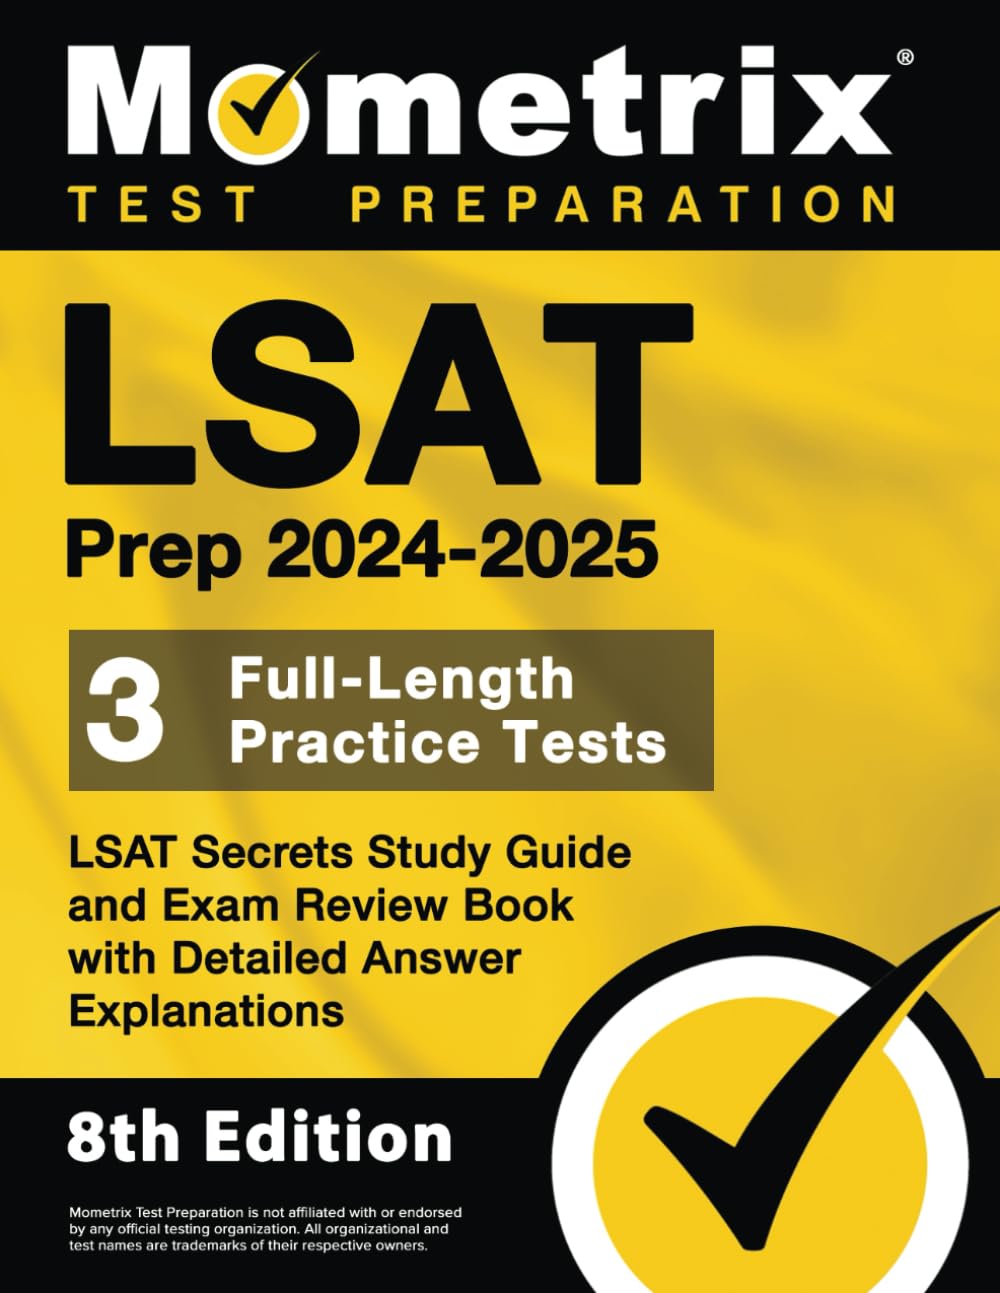 LSAT Prep 2024-2025 - 3 Full-Length Practice Tests, LSAT Secrets Study Guide and Exam Review Book with Detailed Answer Explanations: [8th Edition]